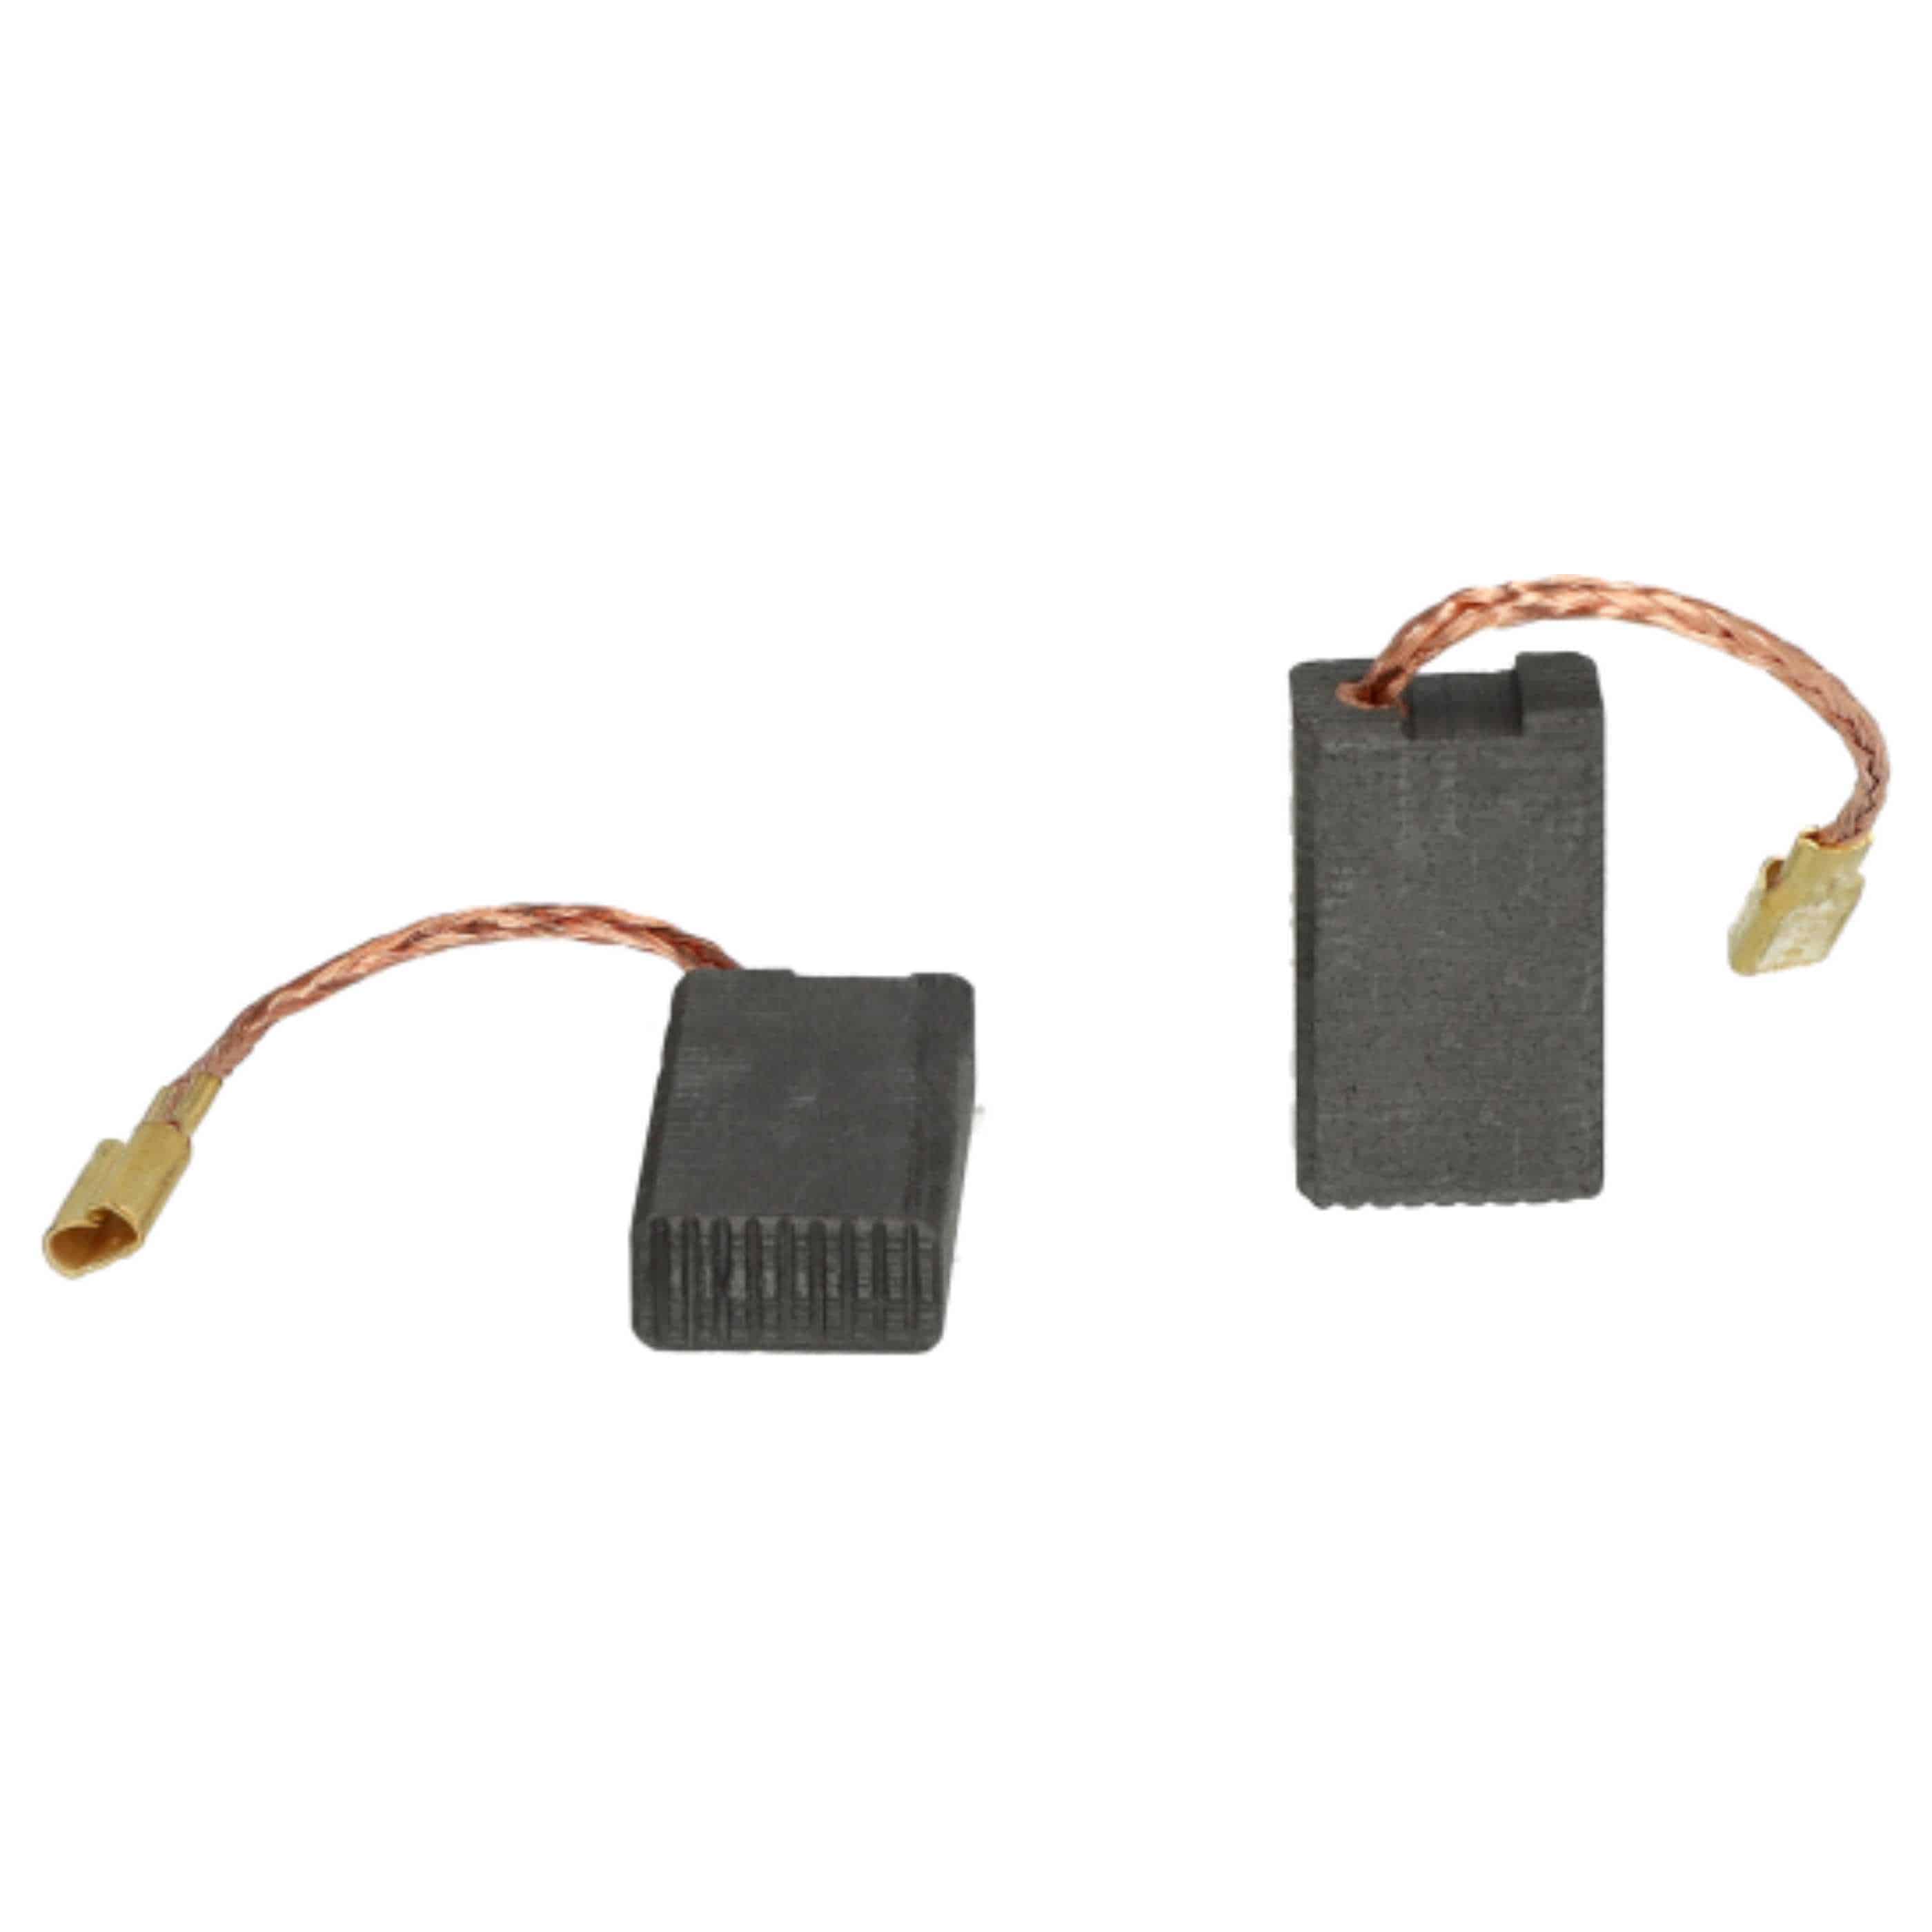 2x Carbon Brush as Replacement for AEG 322155, 326941, 343911, 360787 Electric Power Tools, 17.5 x 10 x 5 mm